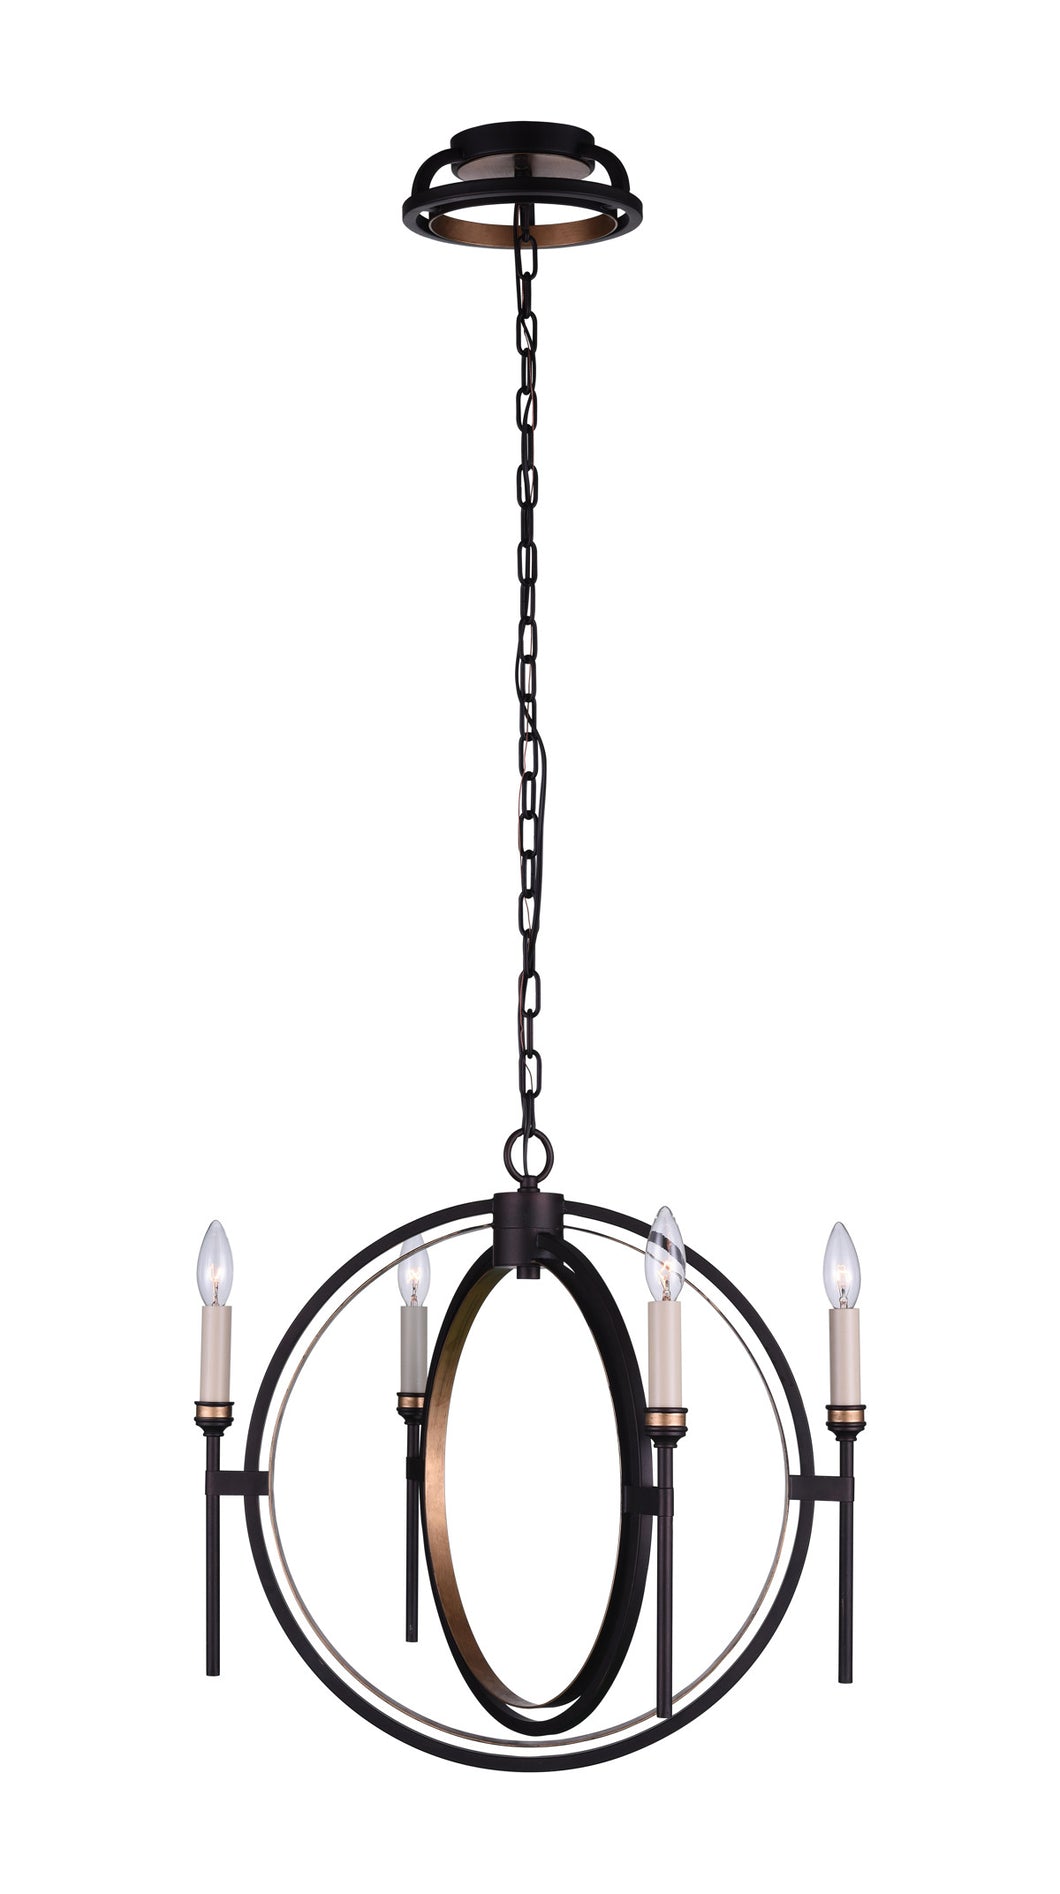 4 Light Candle Chandelier with Golden Brown finish